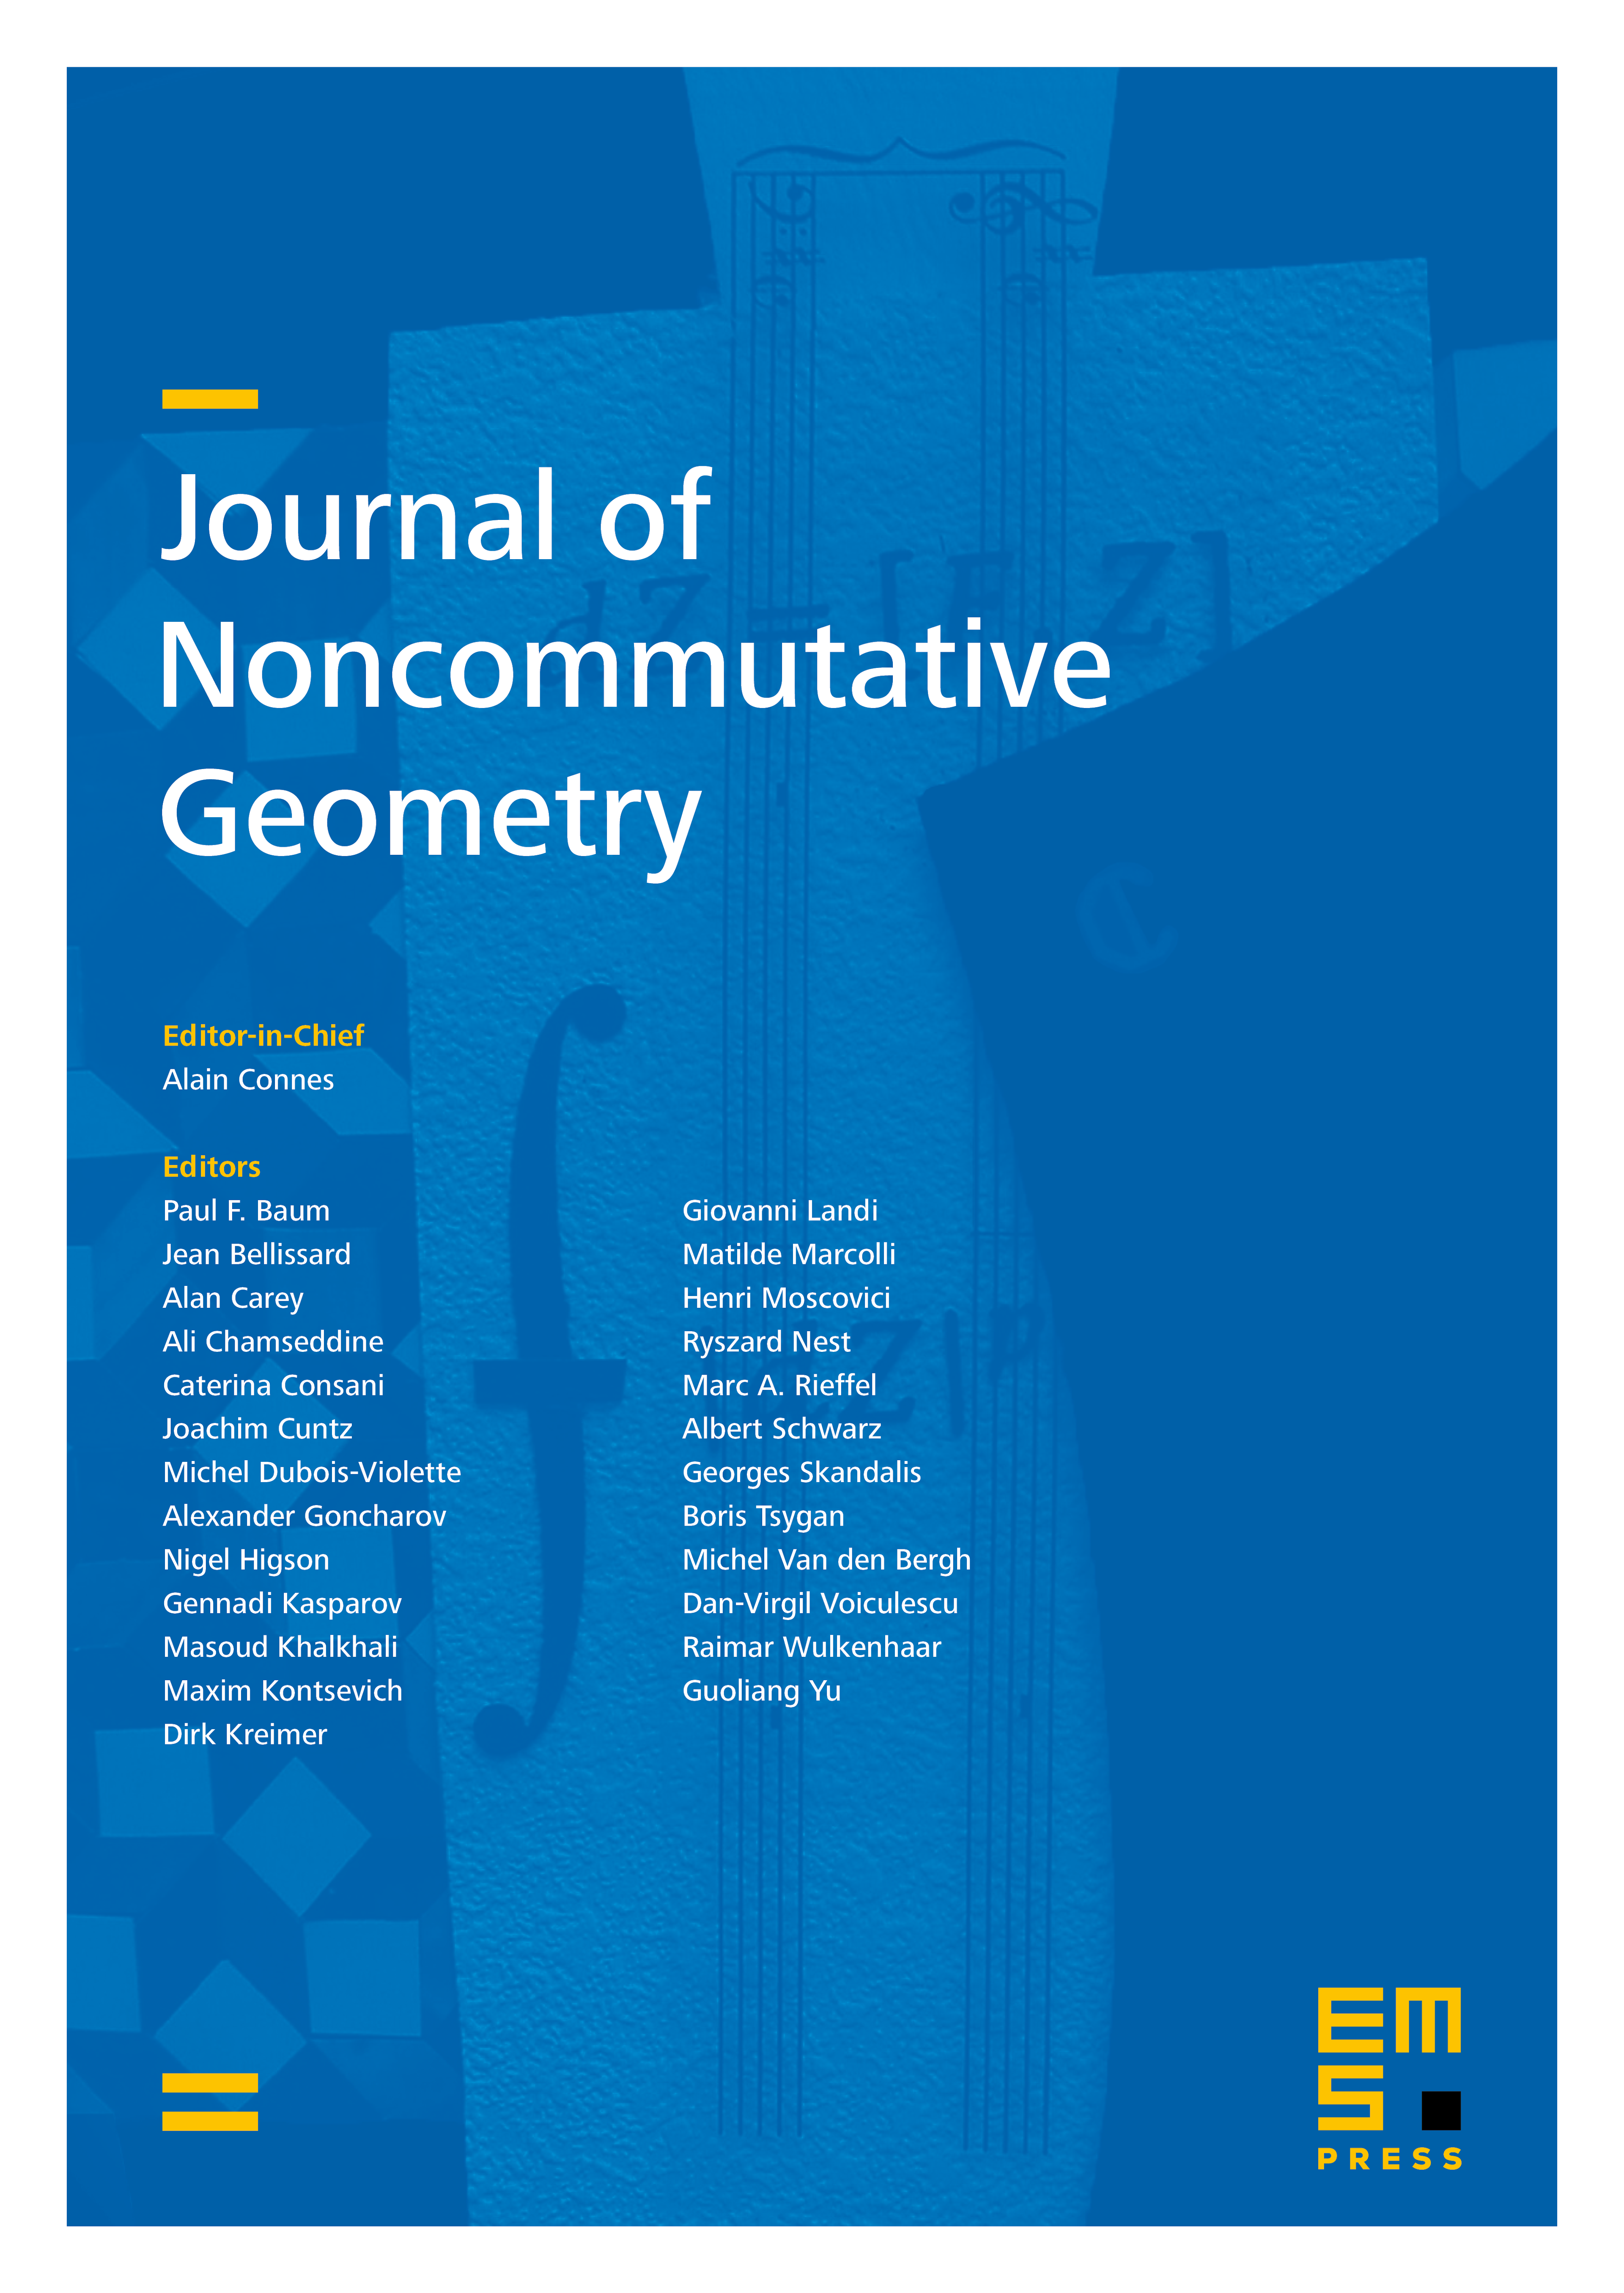 A quantitative relative index theorem and Gromov’s conjectures on positive scalar curvature (with an appendix by Jinmin Wang and Zhizhang Xie) cover